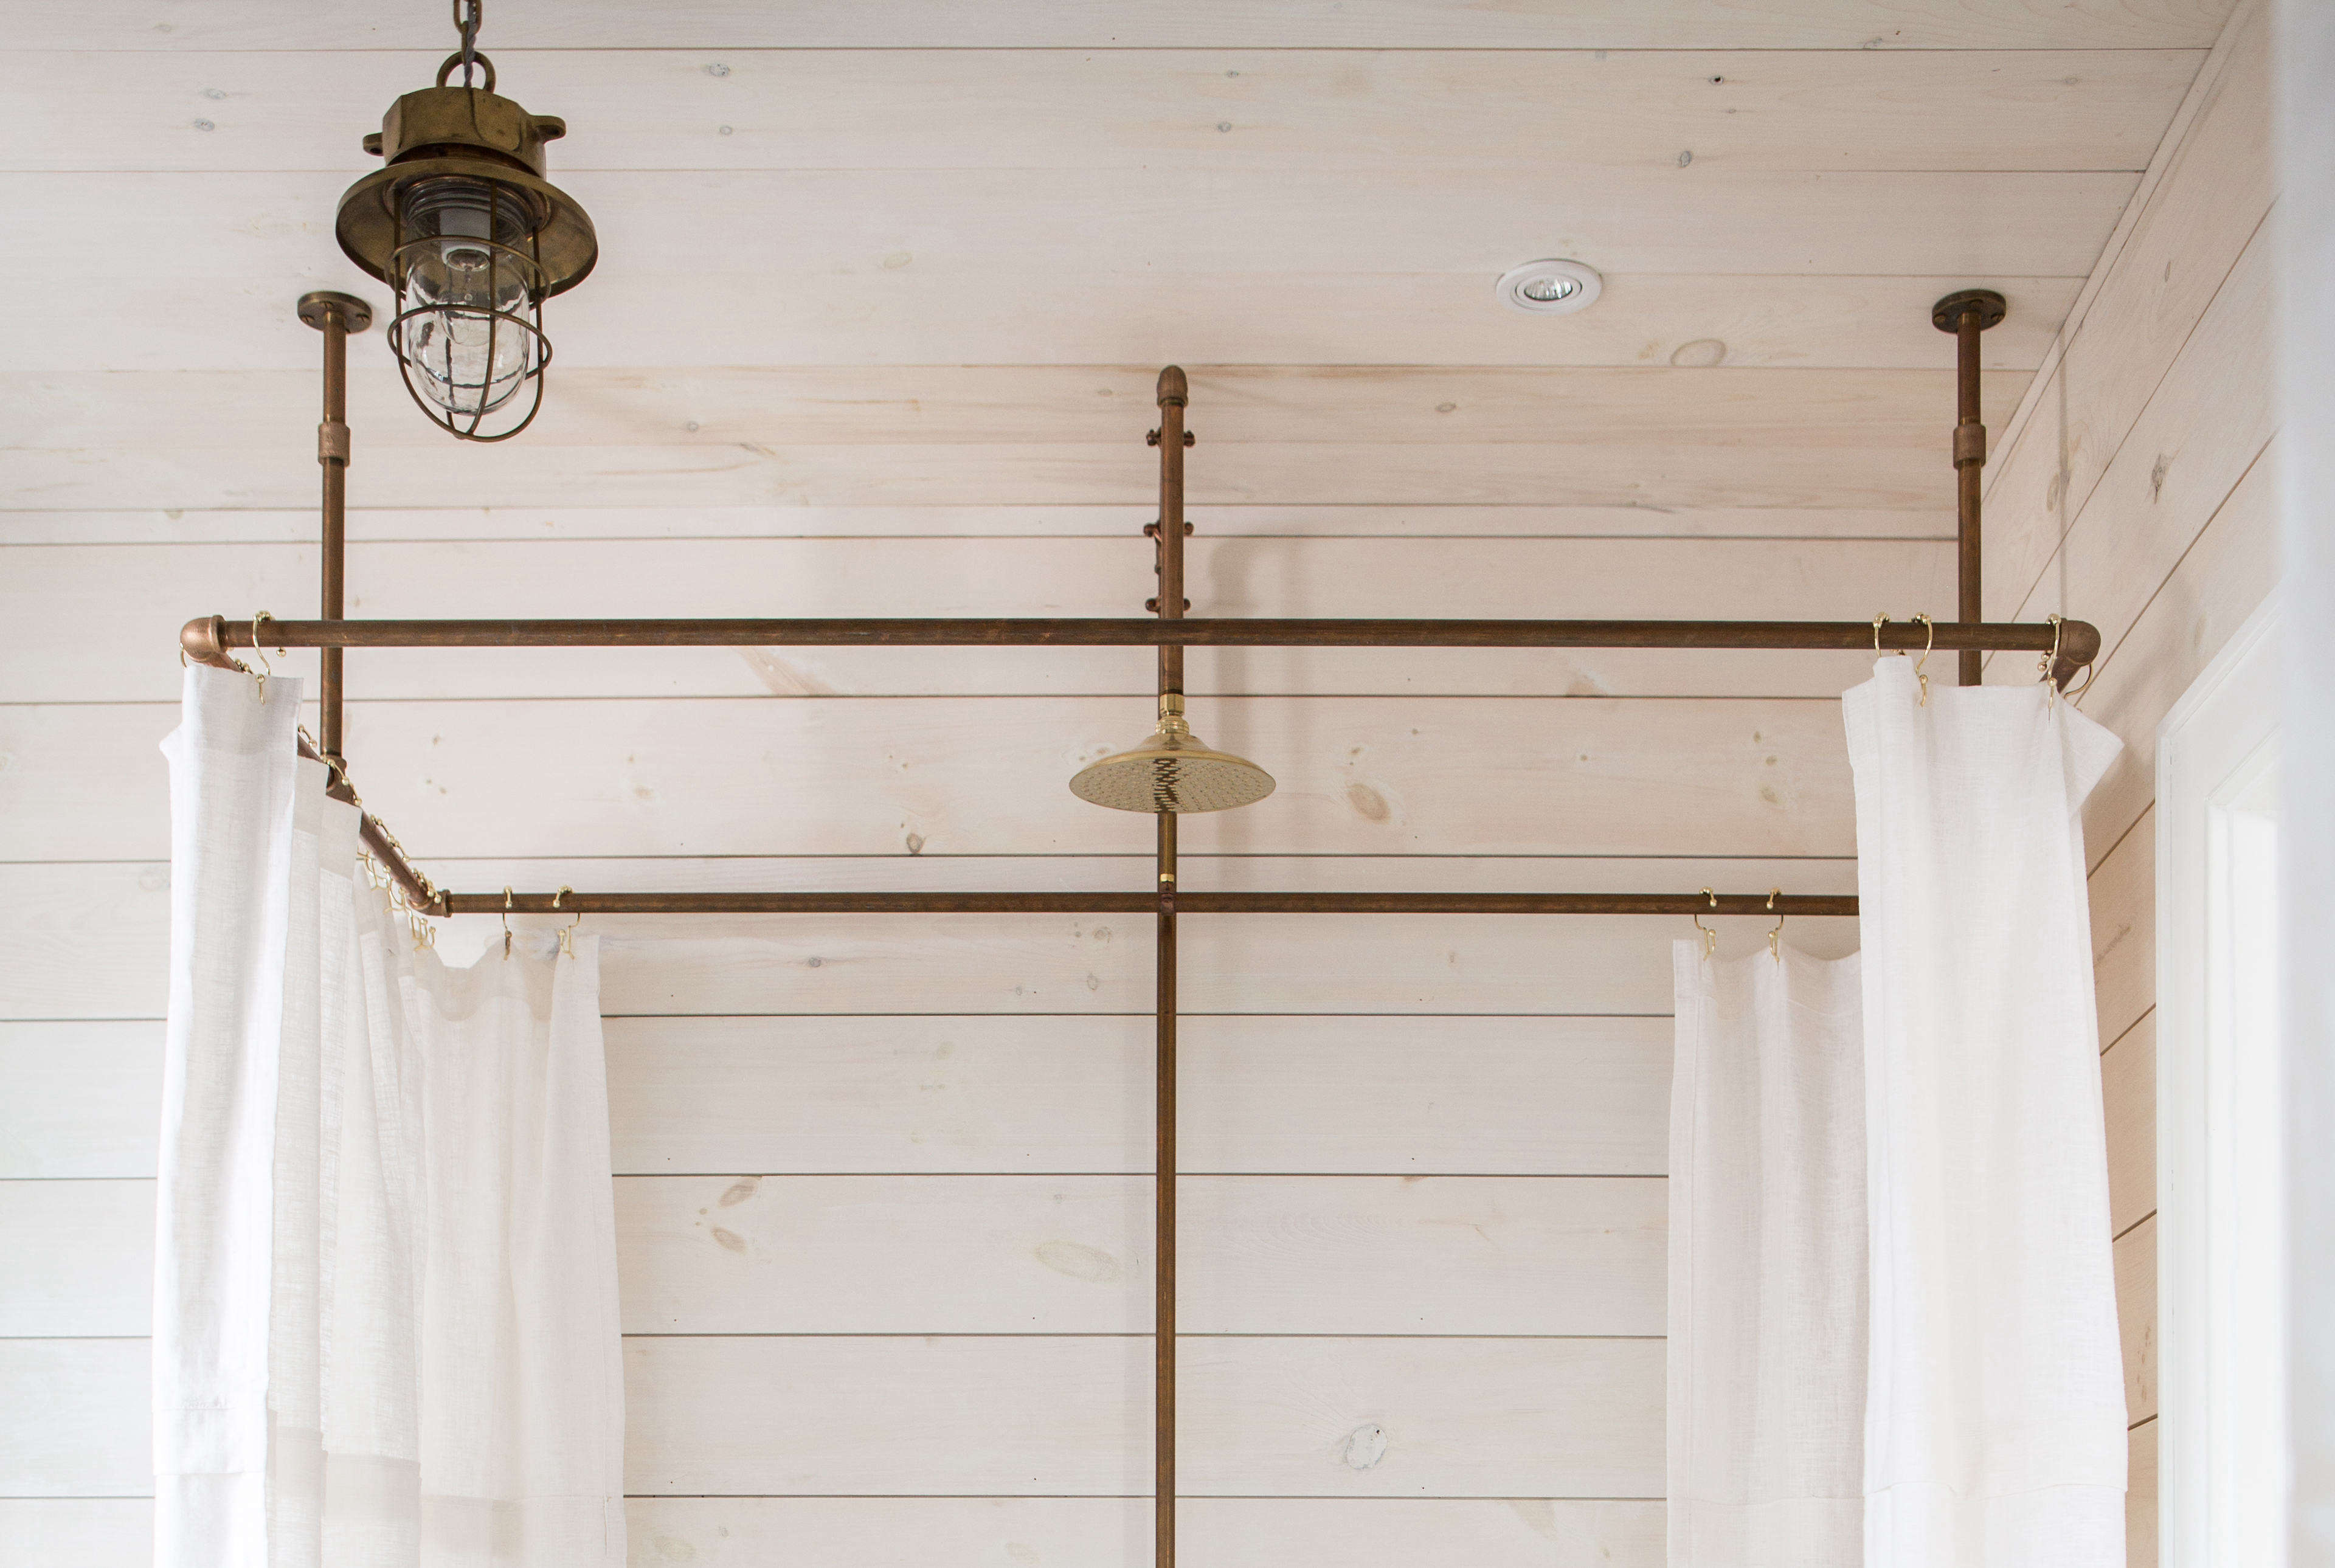 A Diy Shower Curtain Hoop Made From Brass Pipes By Zio Sons